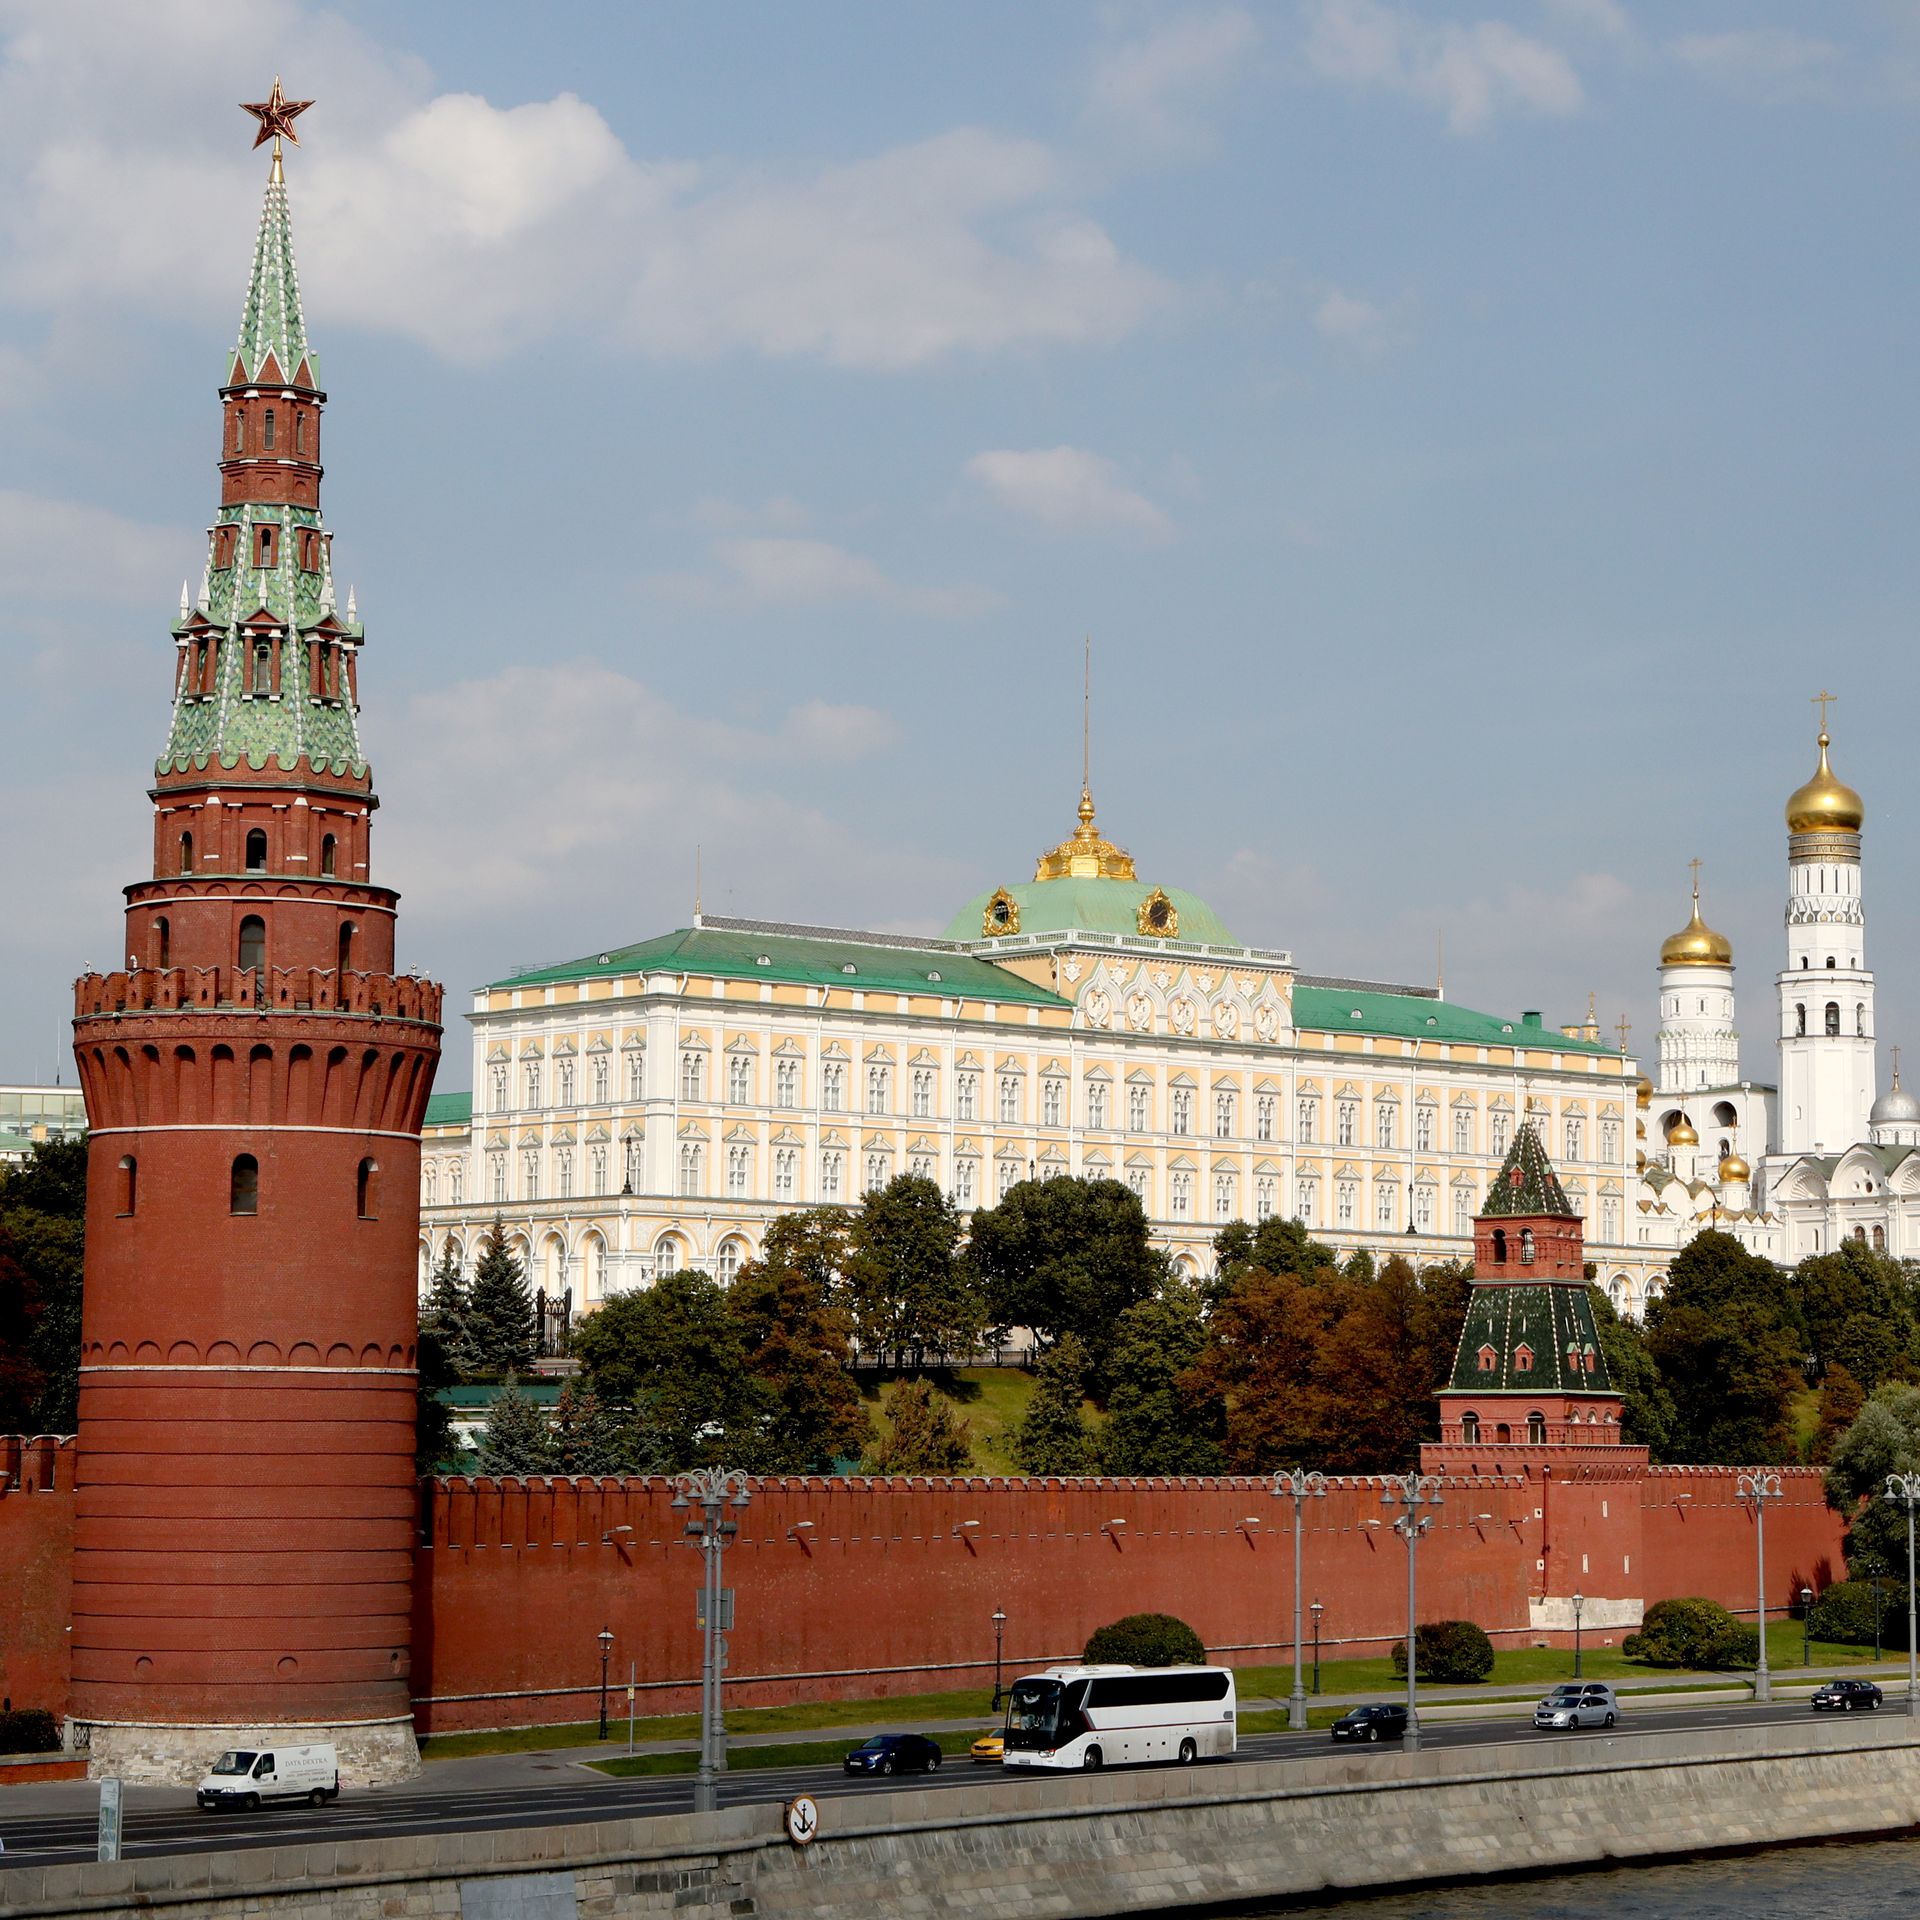 view of the Kremlin compound